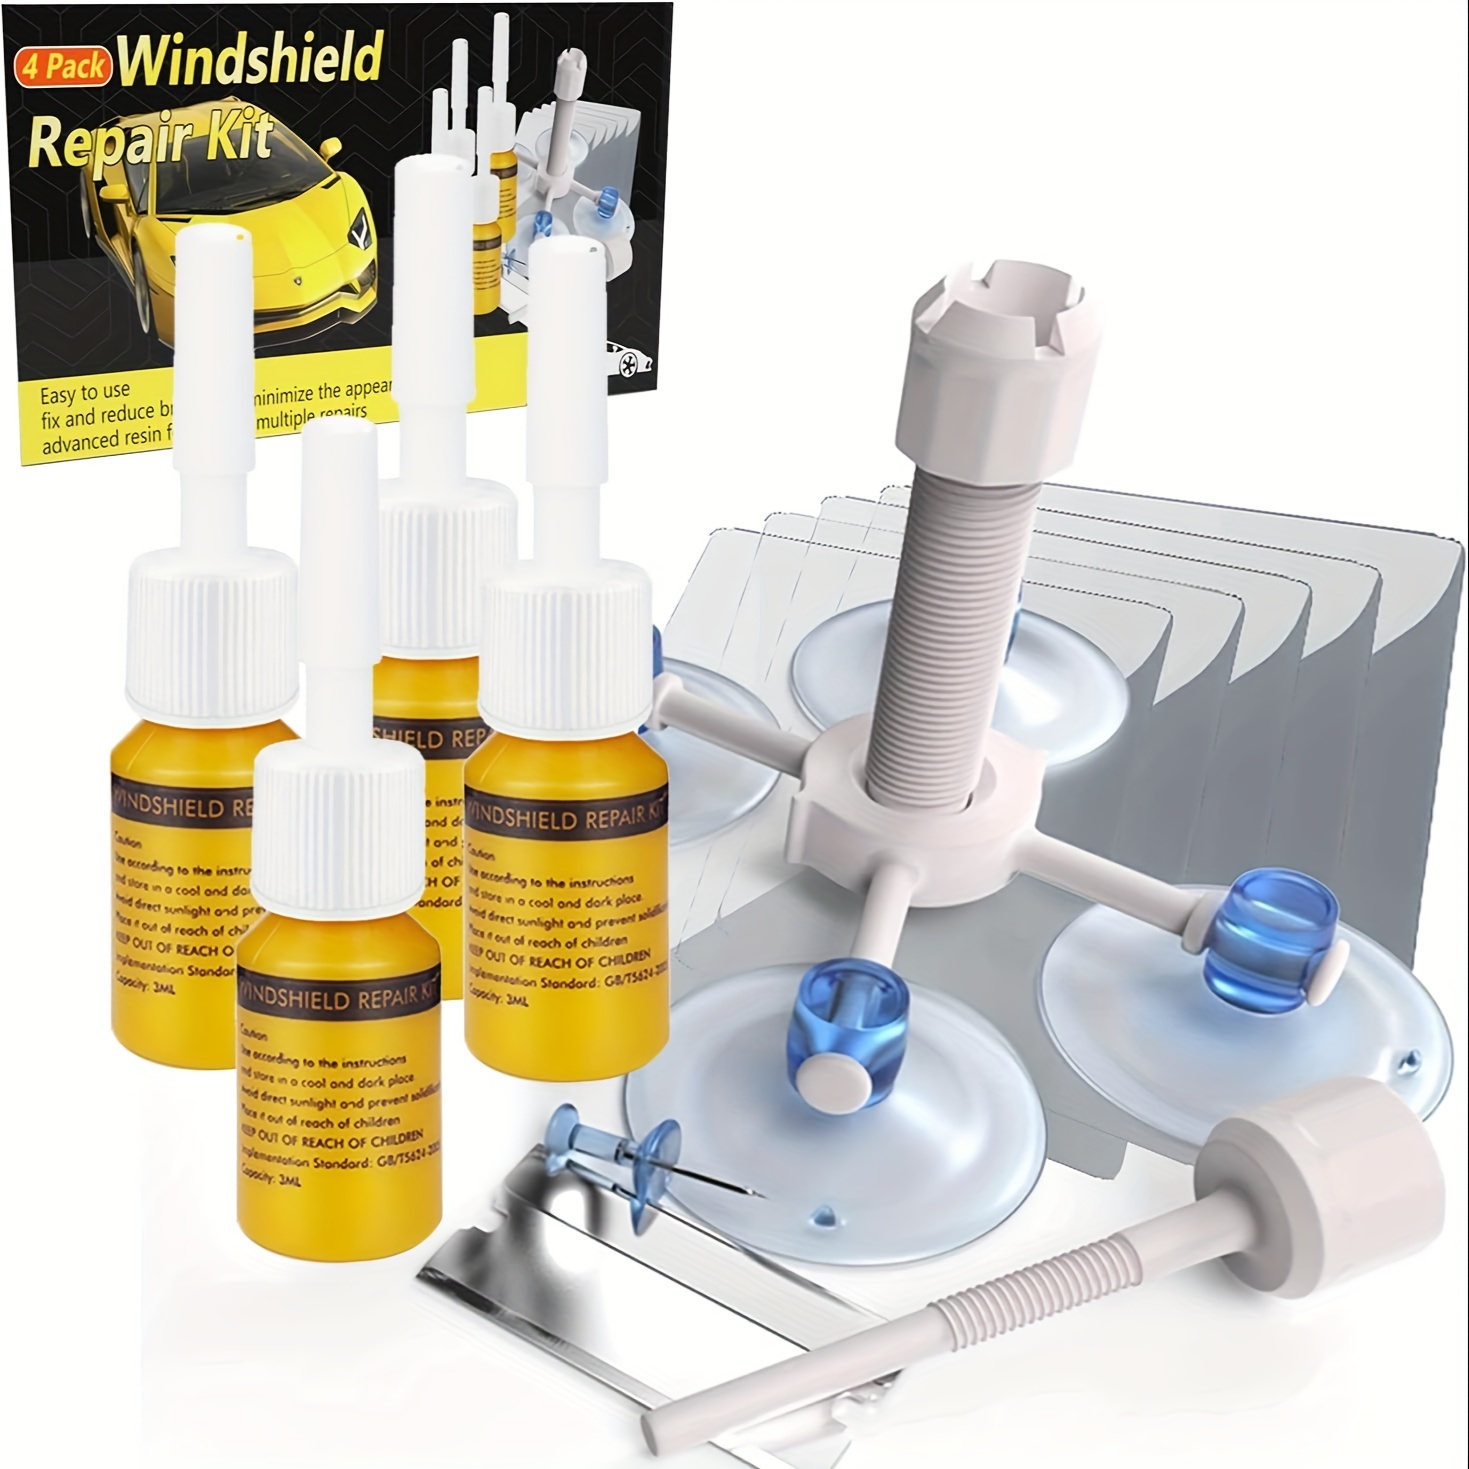 

Windshield Repair Kit, Upgraded 4 Pack Windshield Crack Repair Kit, Windshield Chip Repair Kit With Pressure Syringes, Glass Repair Kit Fluid Quick Fix For Chips, Cracks, Star-shaped Crack